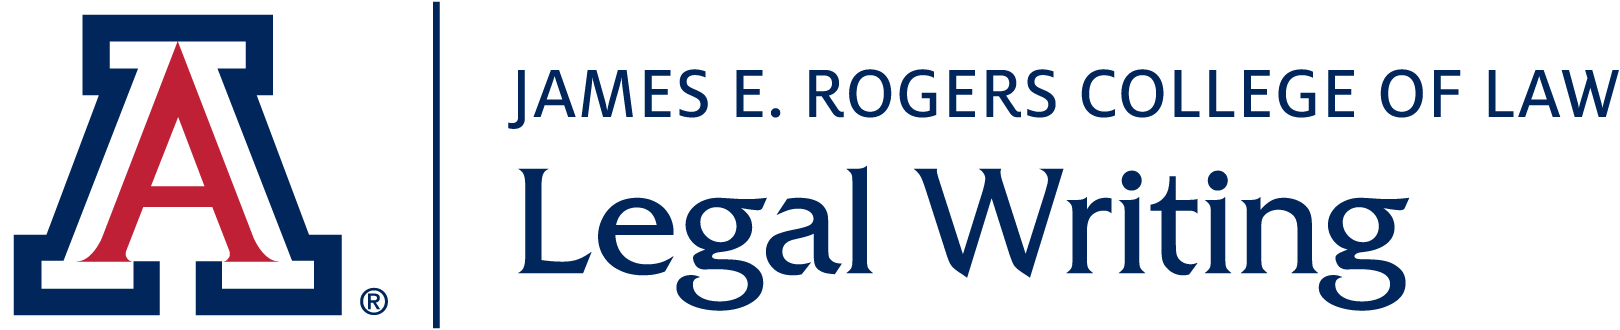 James E. Rogers College of Law Legal Writing | Home